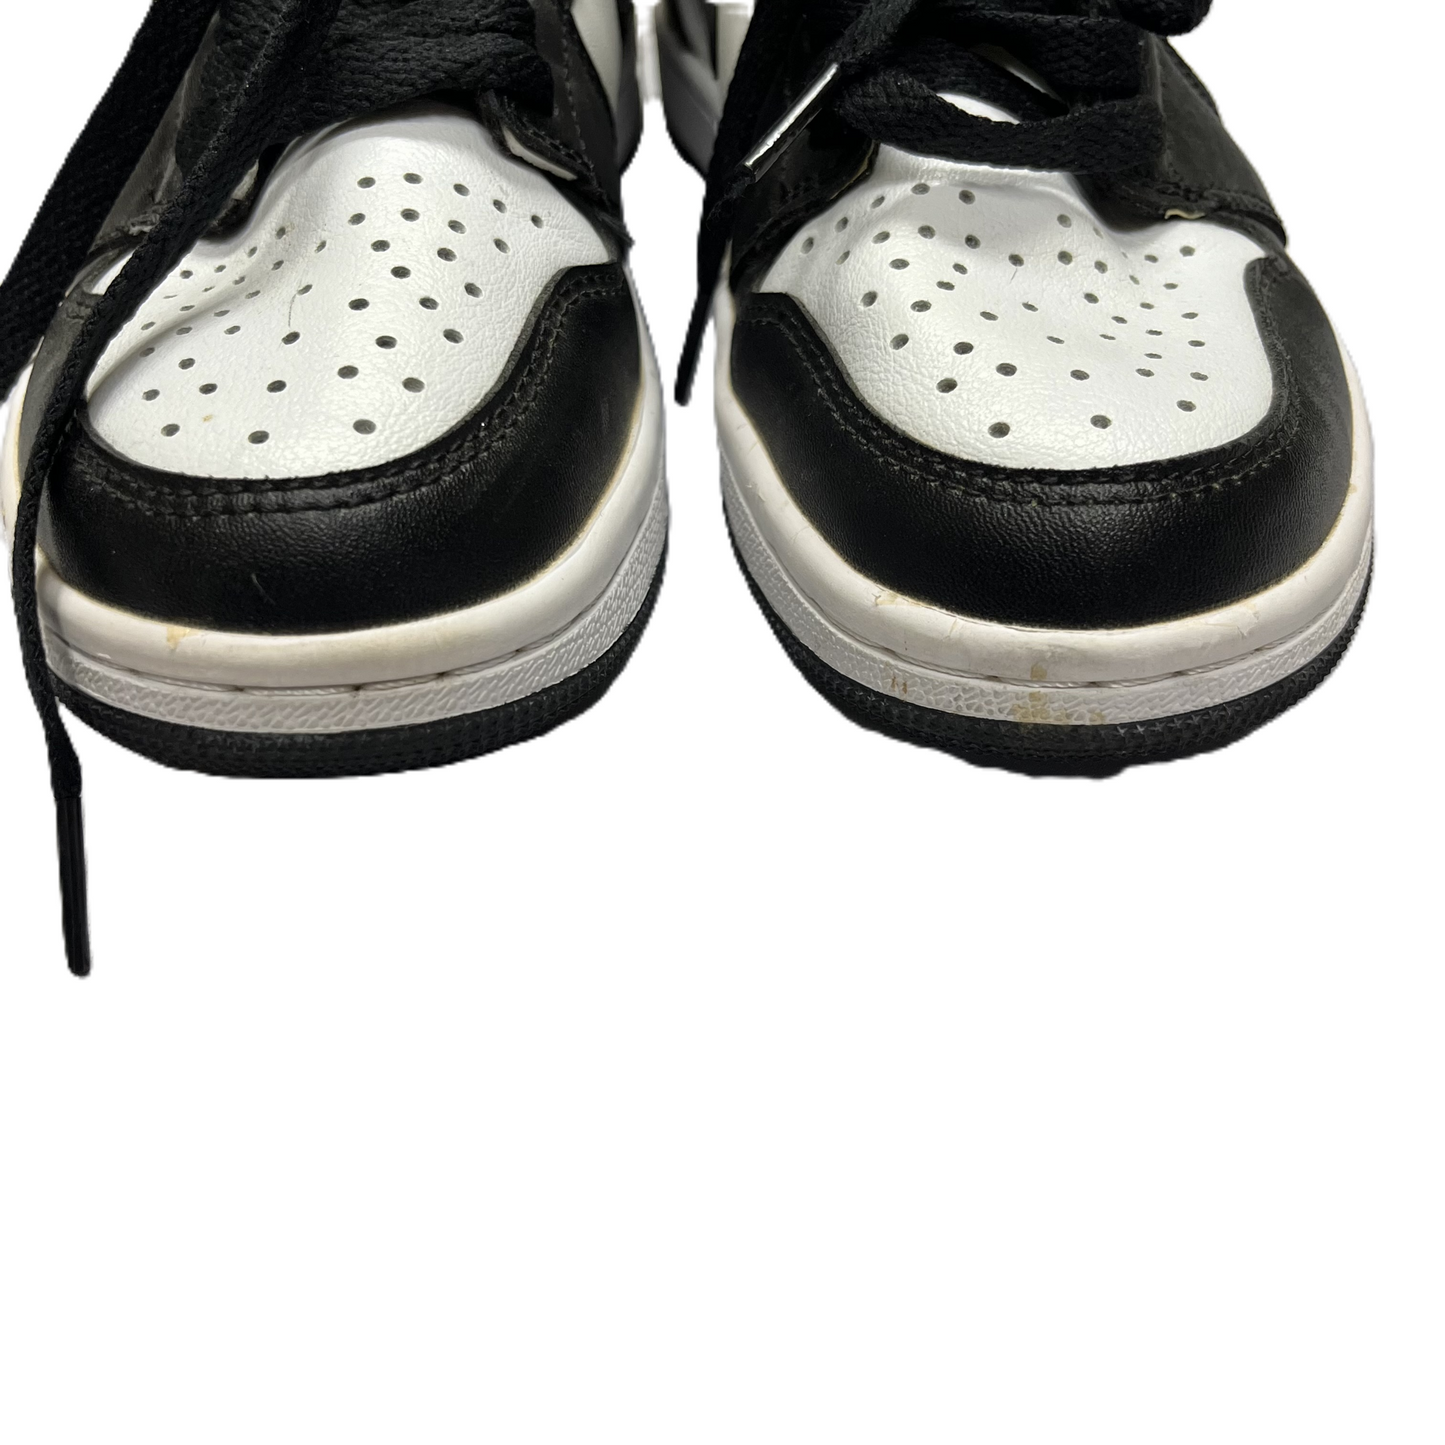 Black & White Shoes Sneakers By Nike, Size: 5.5